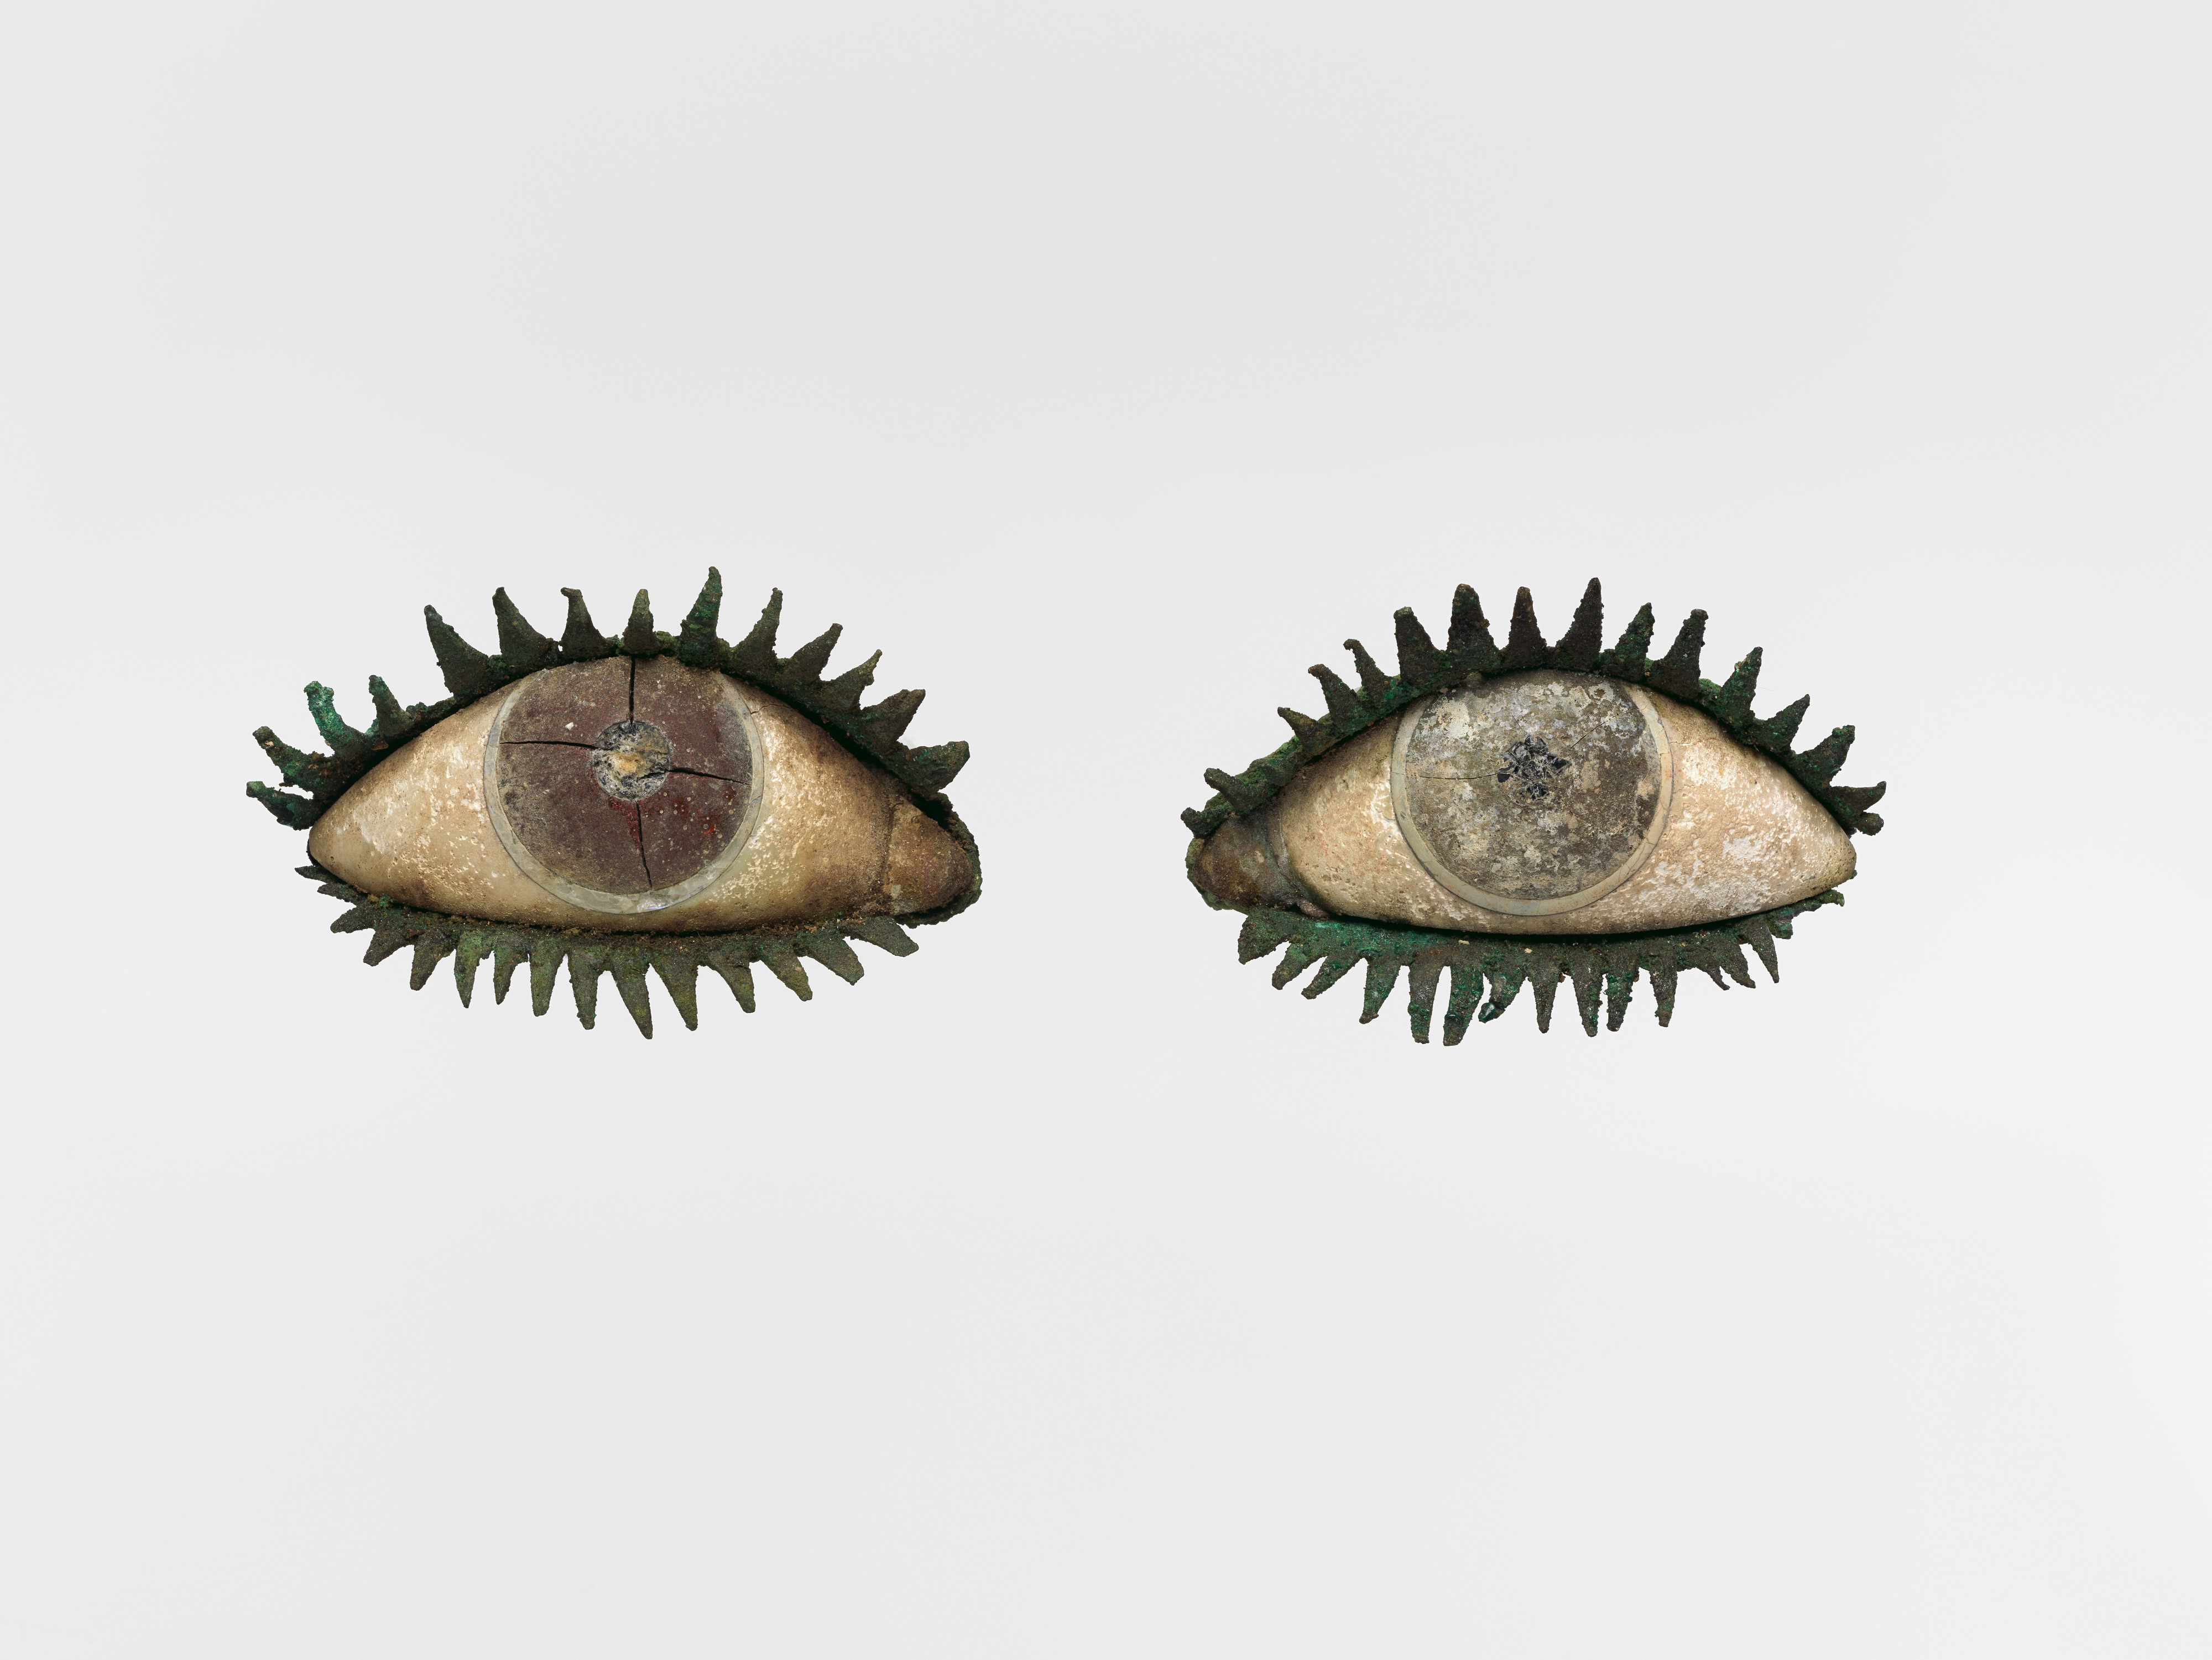 Two groovy eyes made out of wood, with metal eyelashes